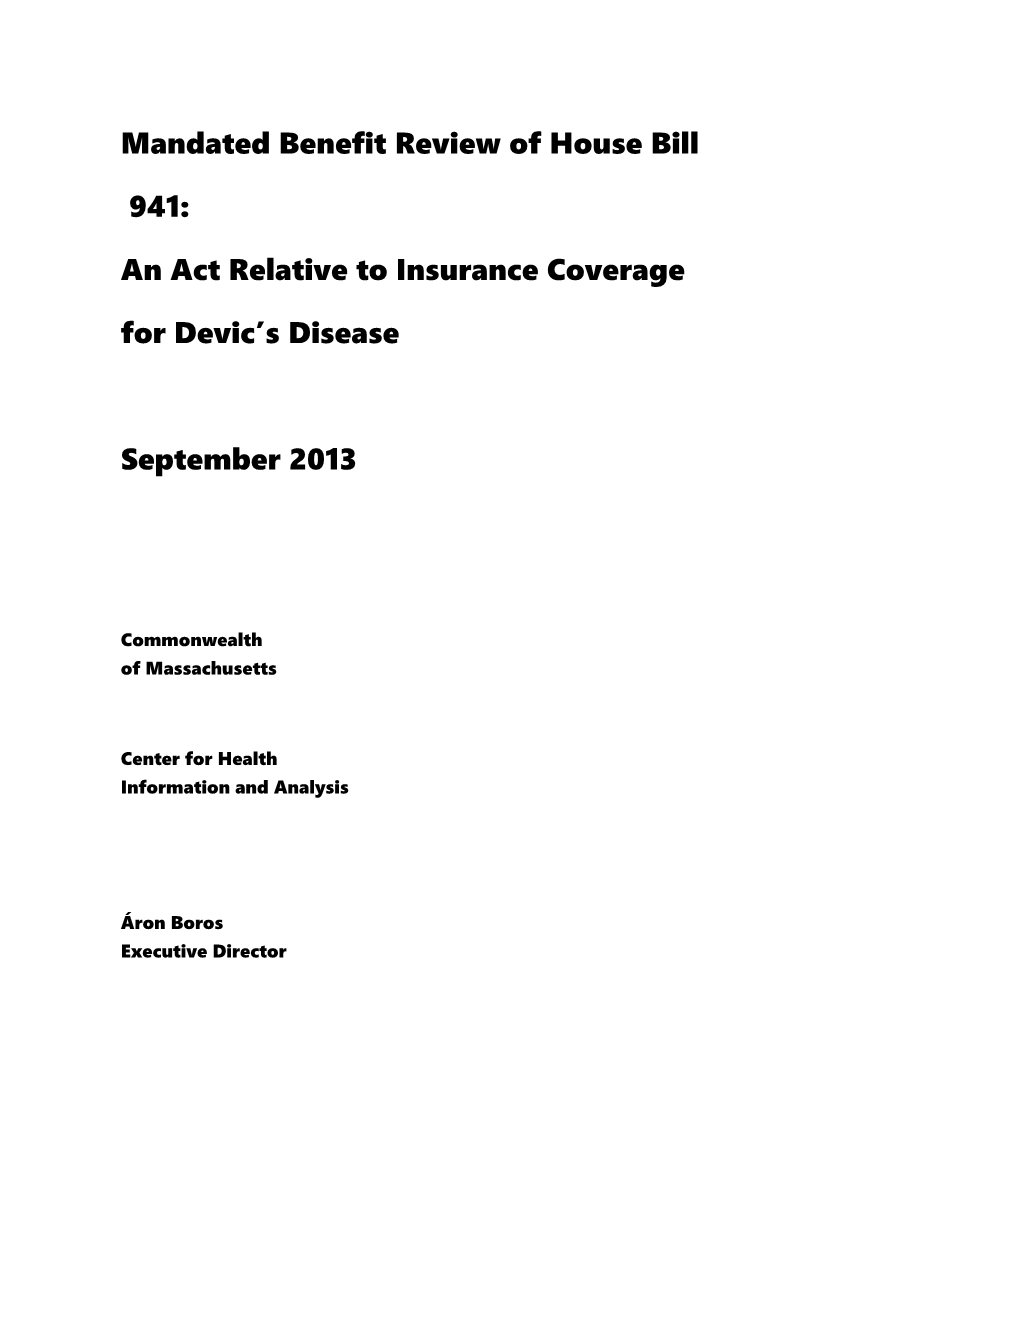 Mandated Benefit Review of House Bill 941: an Act Relative to Insurance Coverage for Devic